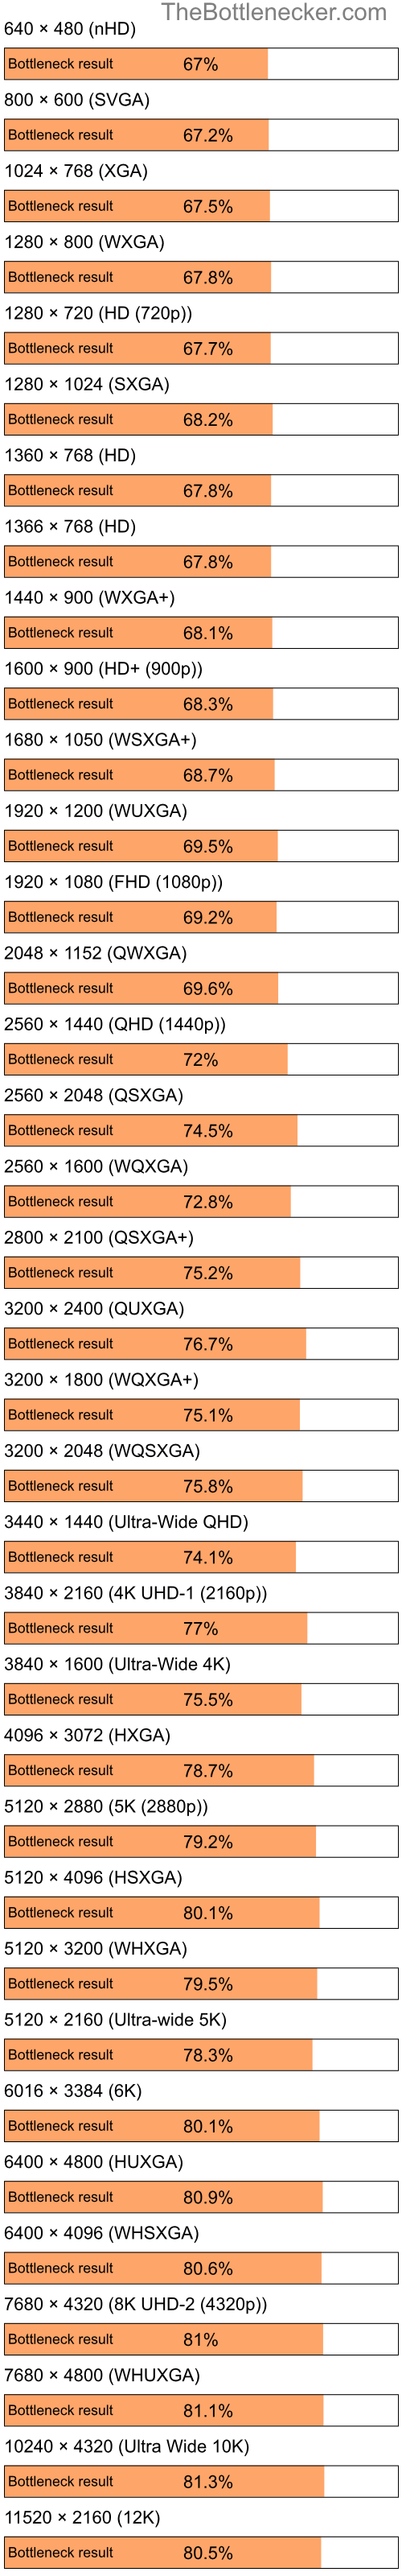 Bottleneck results by resolution for Intel Pentium 4 and NVIDIA GeForce 210 in Graphic Card Intense Tasks